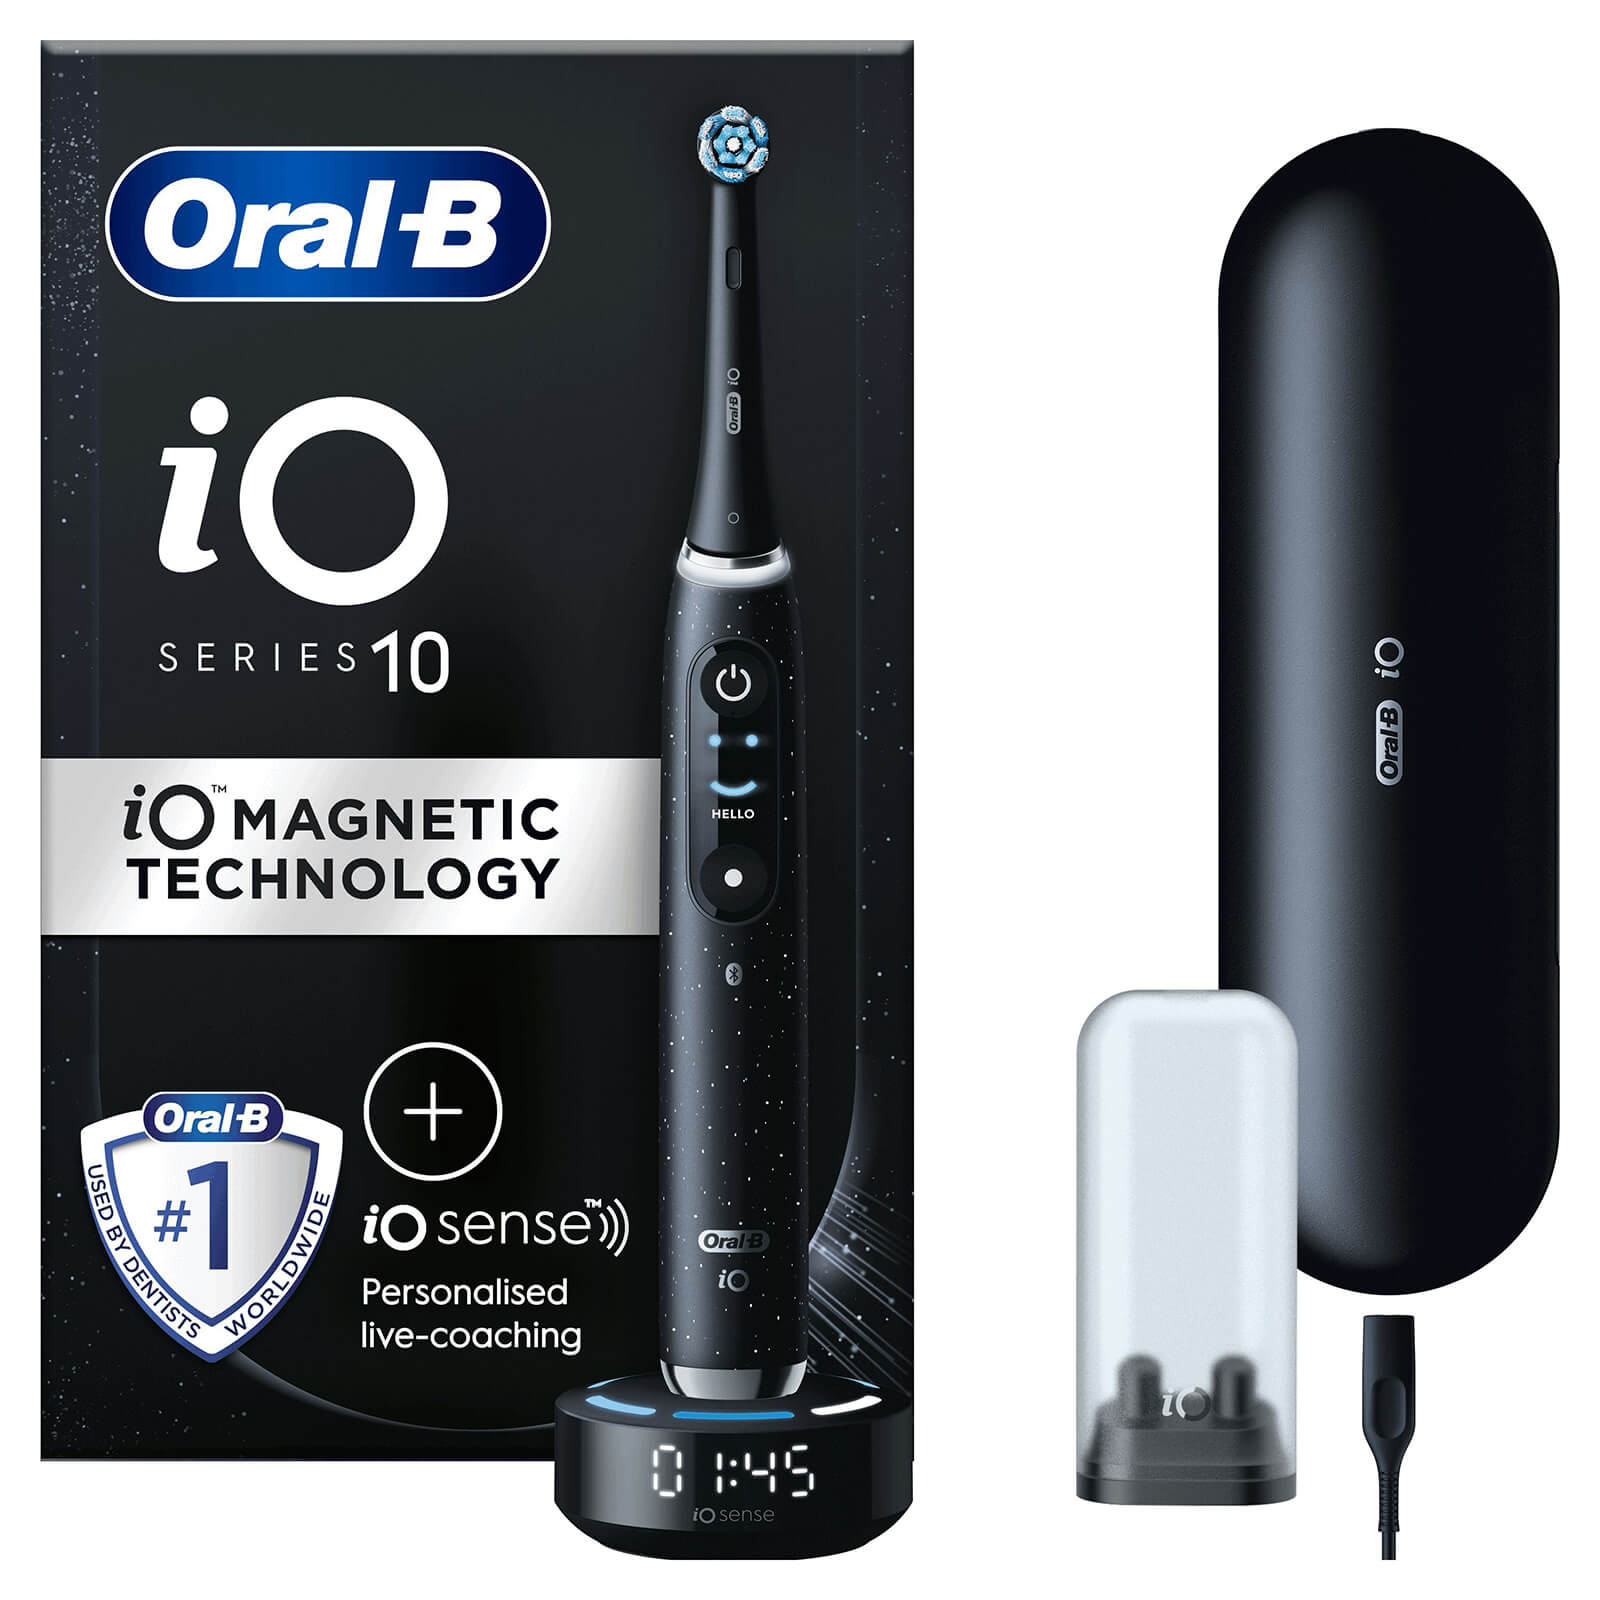 Oral-B iO10 Cosmic Black Electric Toothbrush with Charging Travel Case - Toothbrush